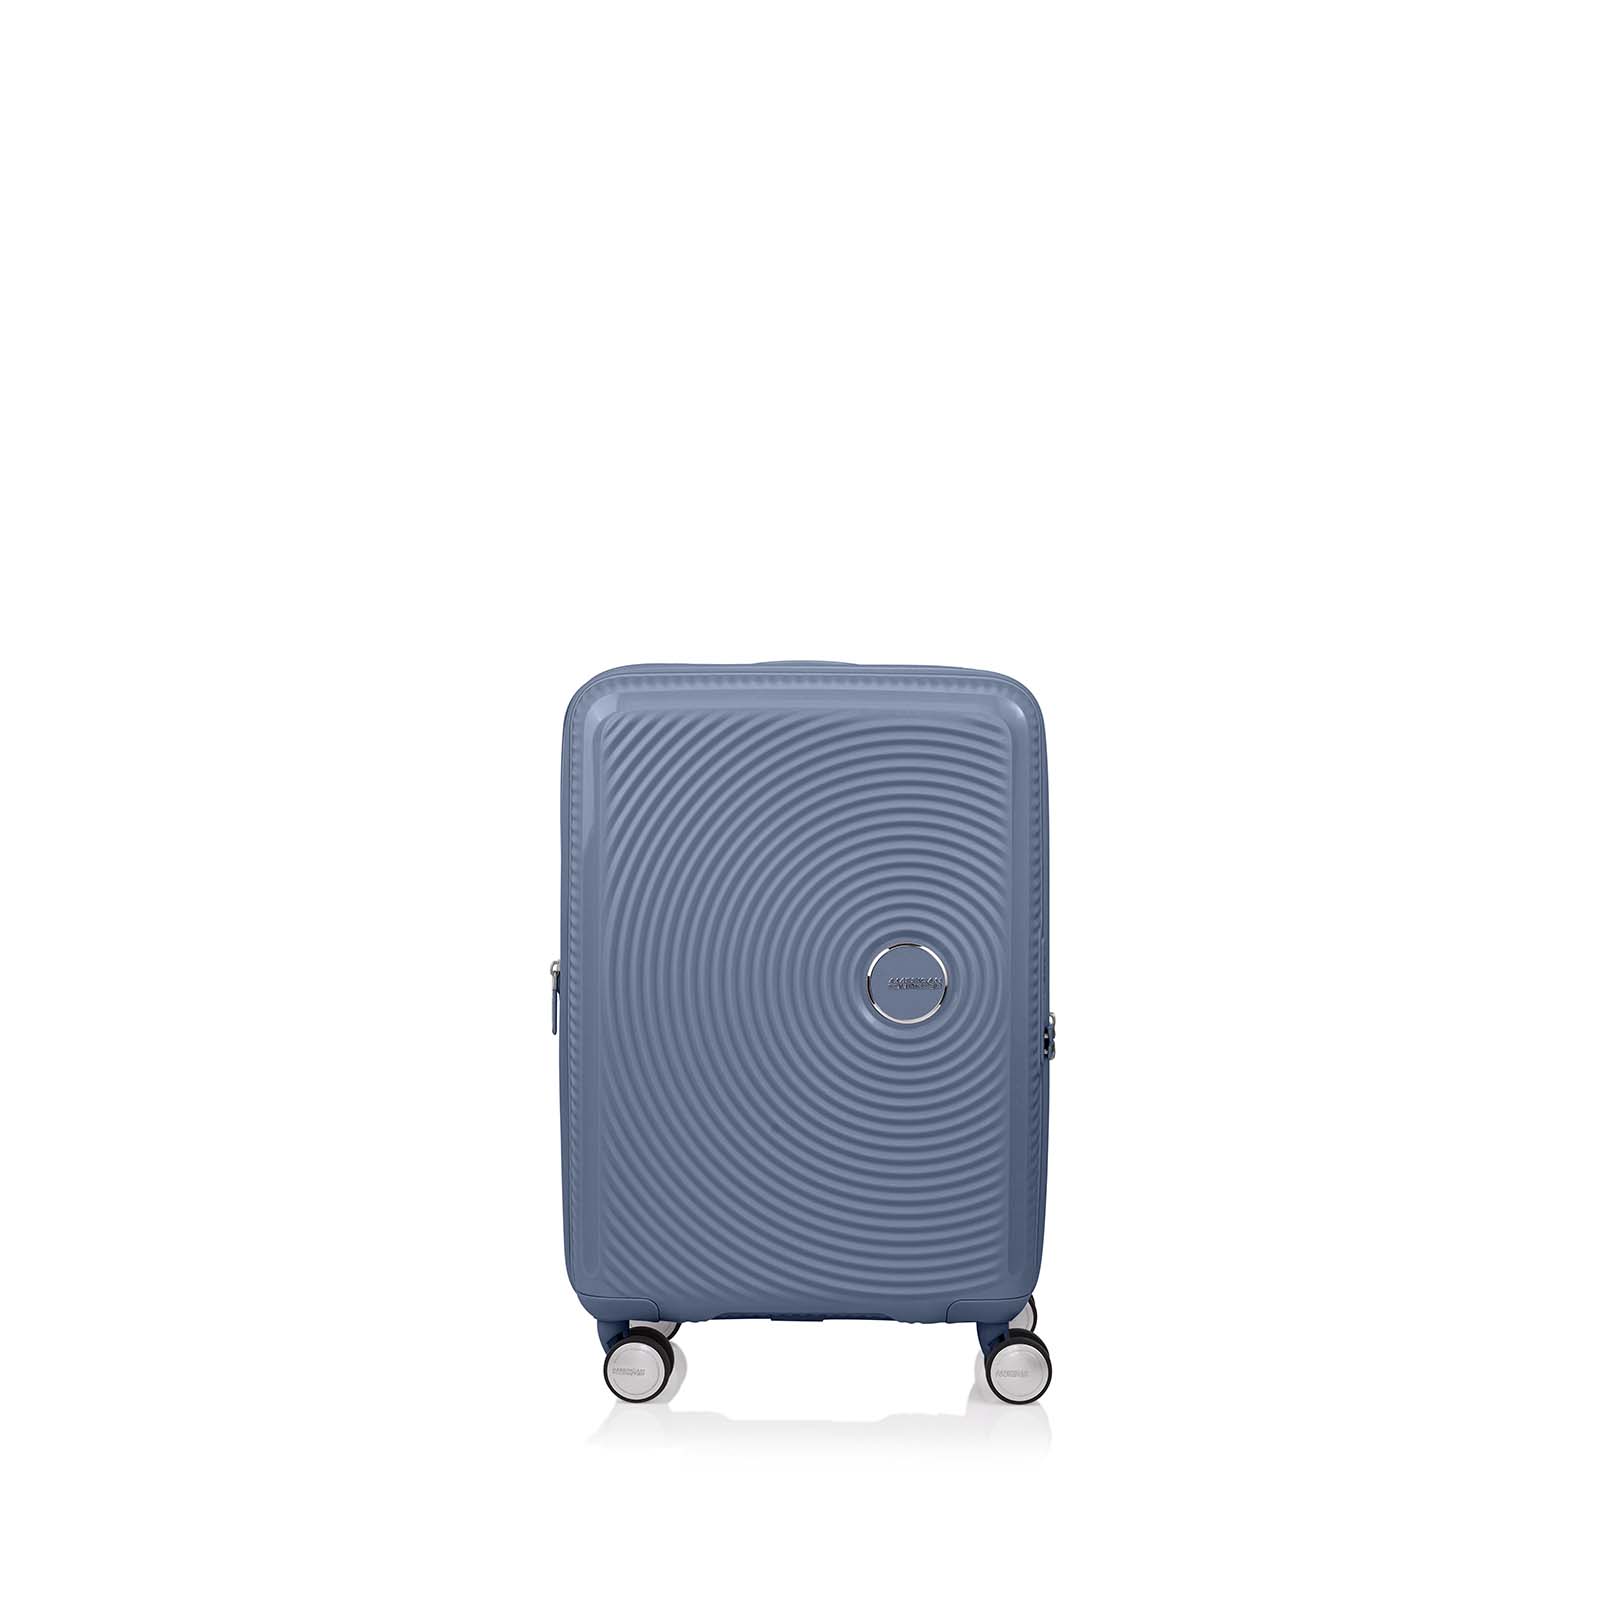 American-Tourister-Curio-2-55cm-Carry-On-Suitcase-Stone-Blue-Front